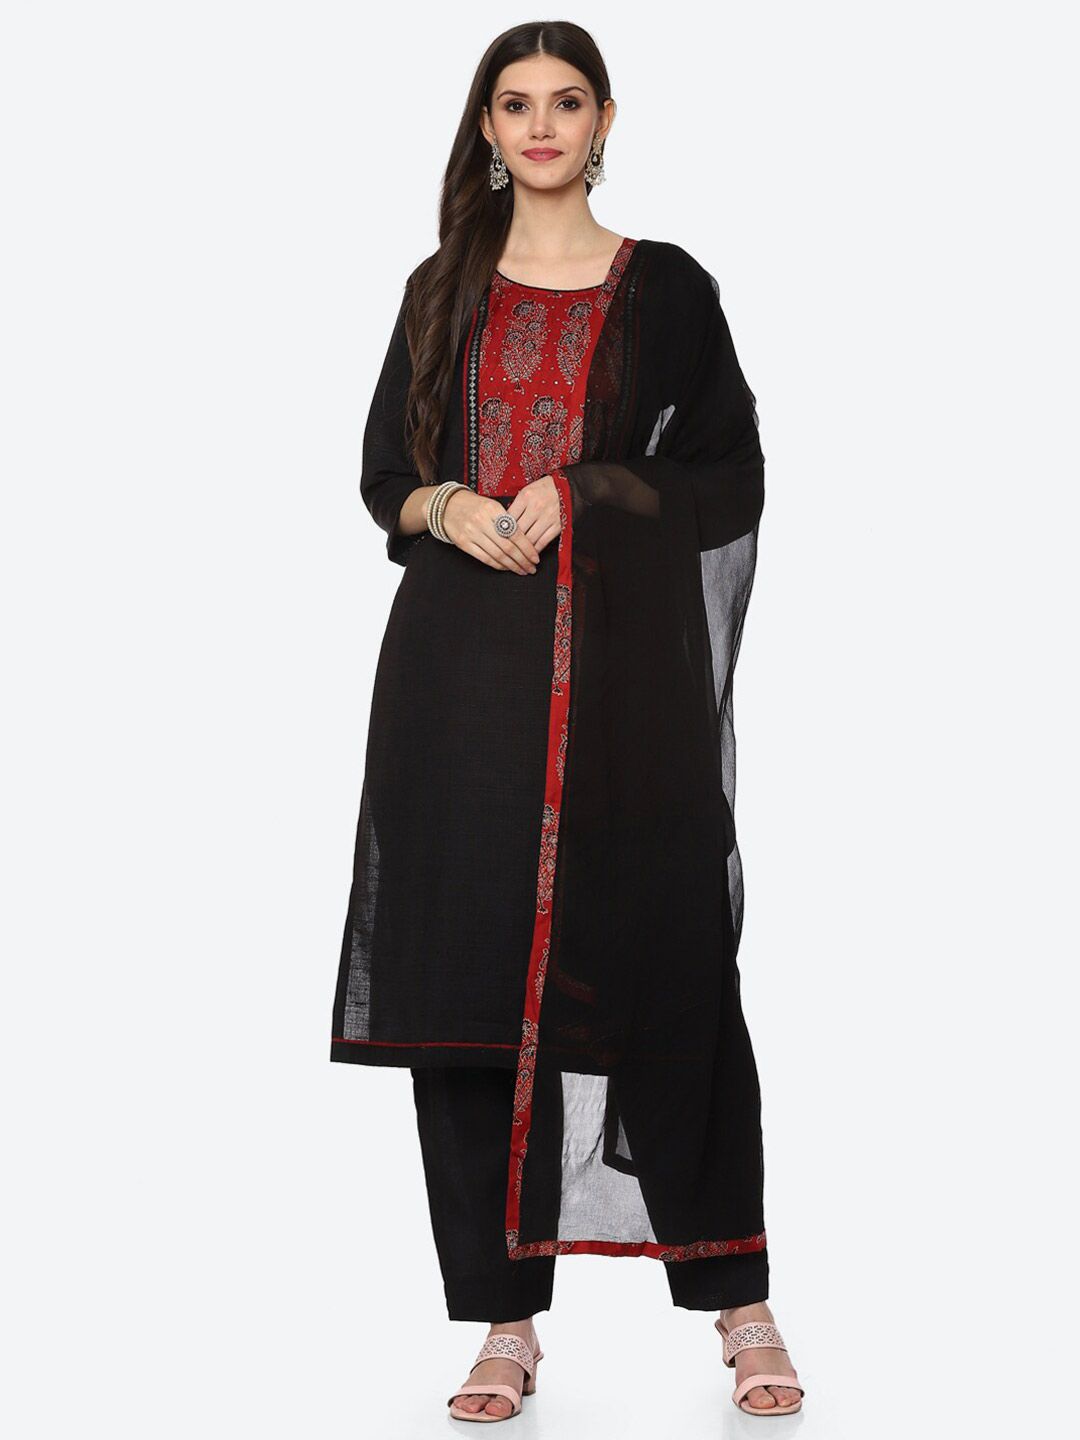 Biba Black & Red Unstitched Dress Material Price in India